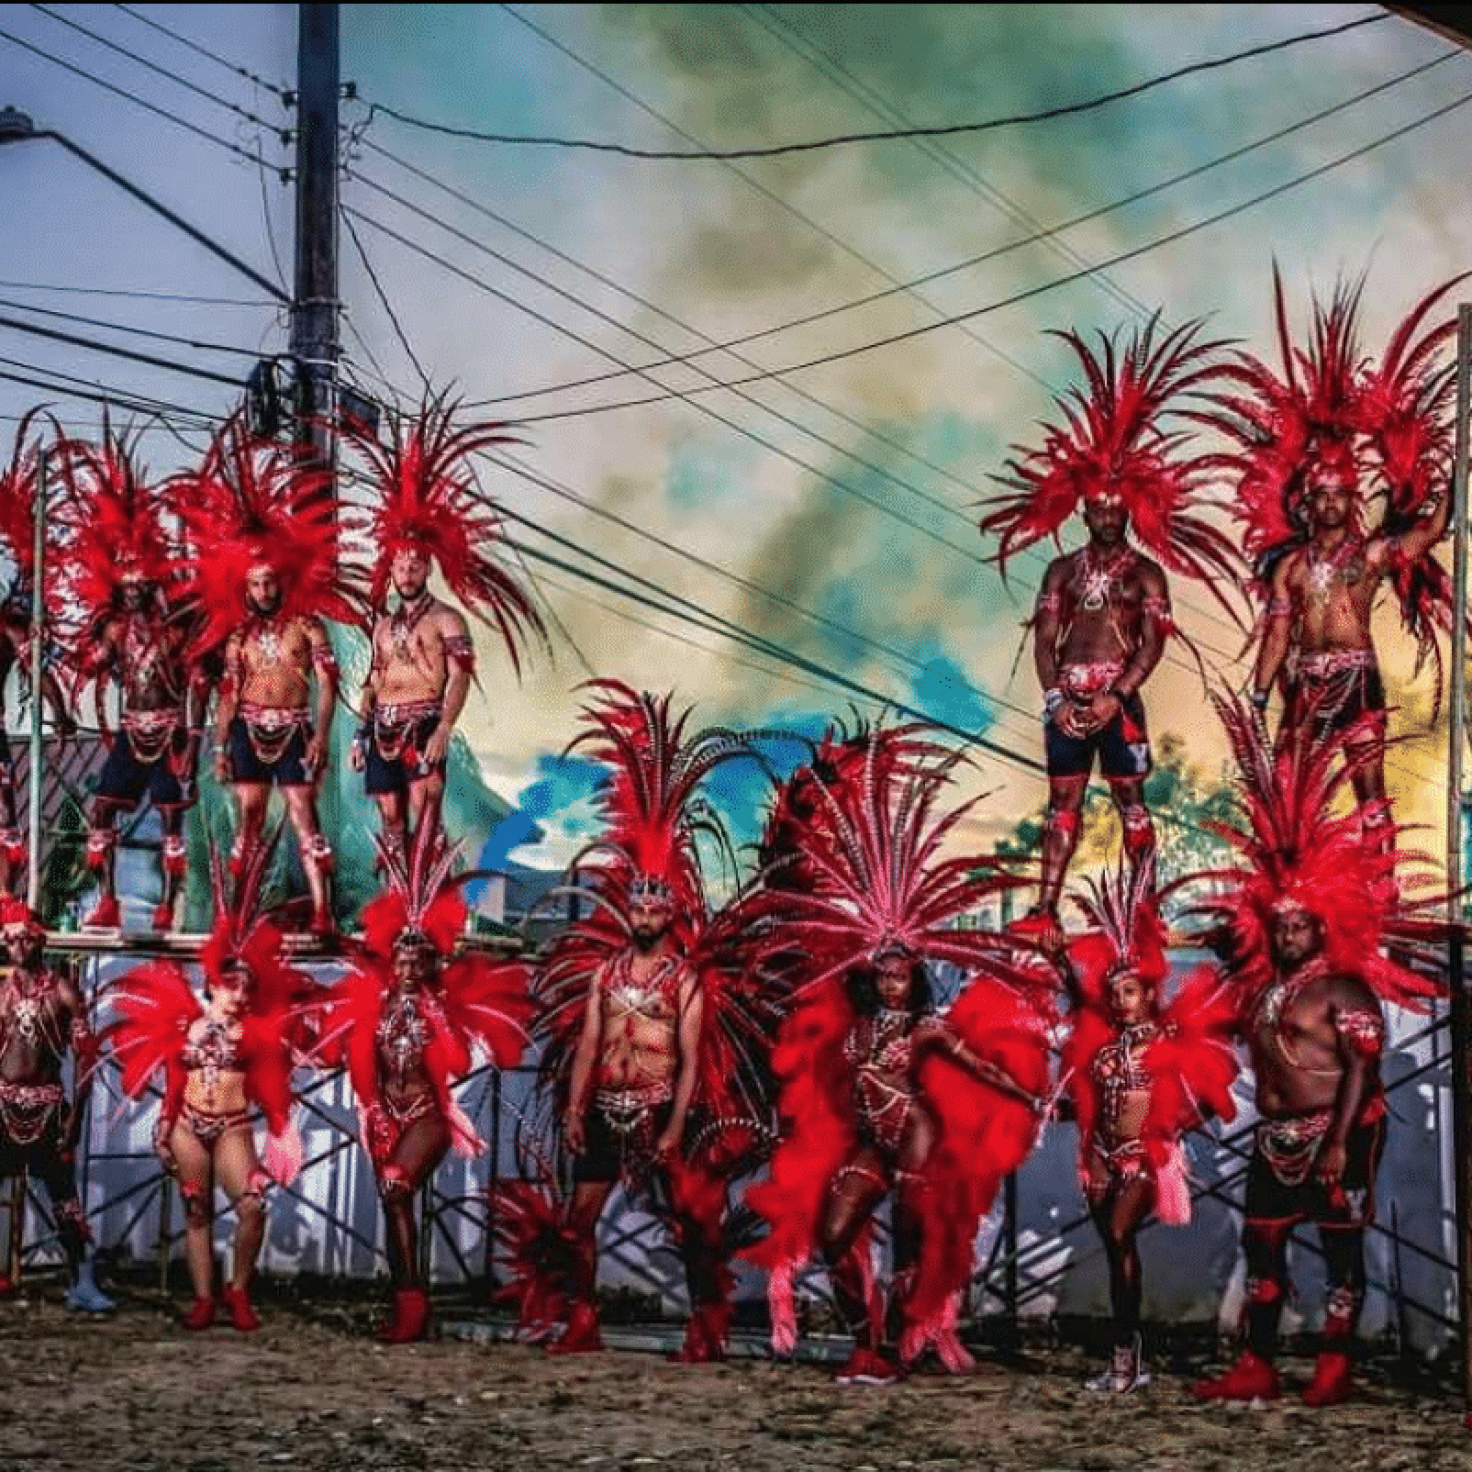 Welcome to Soca Kingdom! A First Timer's Guide to Trinidad Carnival